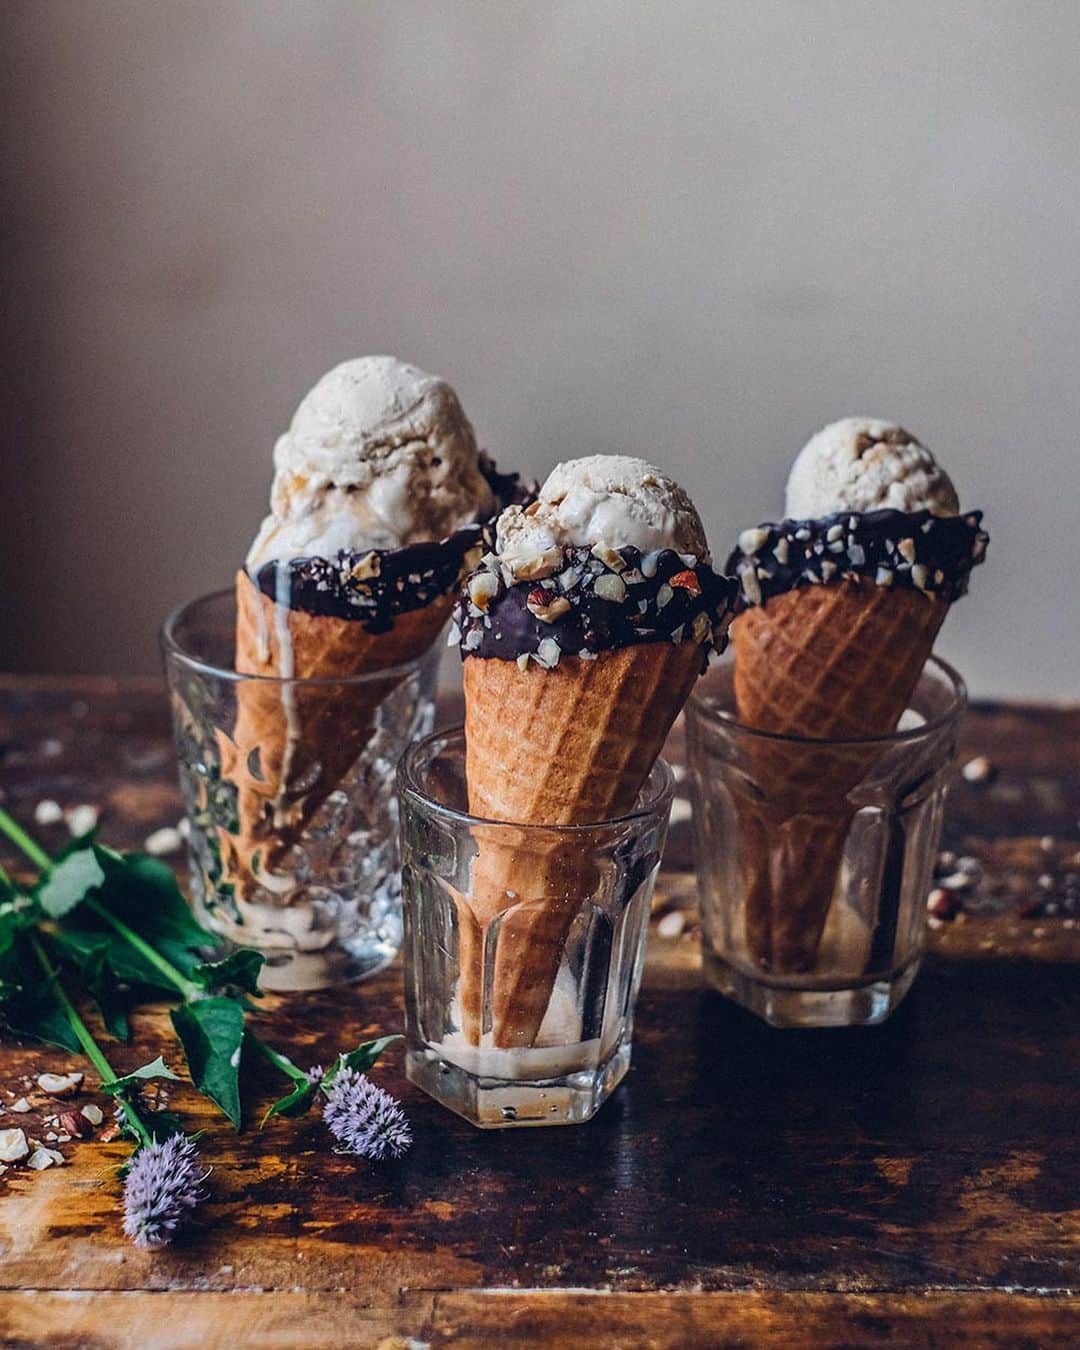 Our Food Storiesのインスタグラム：「More photos from this delicious hazelnut ice cream with coffee caramel and the best gluten-free chocolate dipped ice cream cones. Get the recipe on the blog, link is in profile 🍦#ourfoodstories  ____ #icecreamlover #icecreamrecipe #glutenfreerecipes #glutenfri #glutenfrei #glutenfreierezepte #eisrezept #foodphotography #foodstylist #germanfoodblogger #onthetable #stilllifephotography #coffeecaramel #icecreamcone」